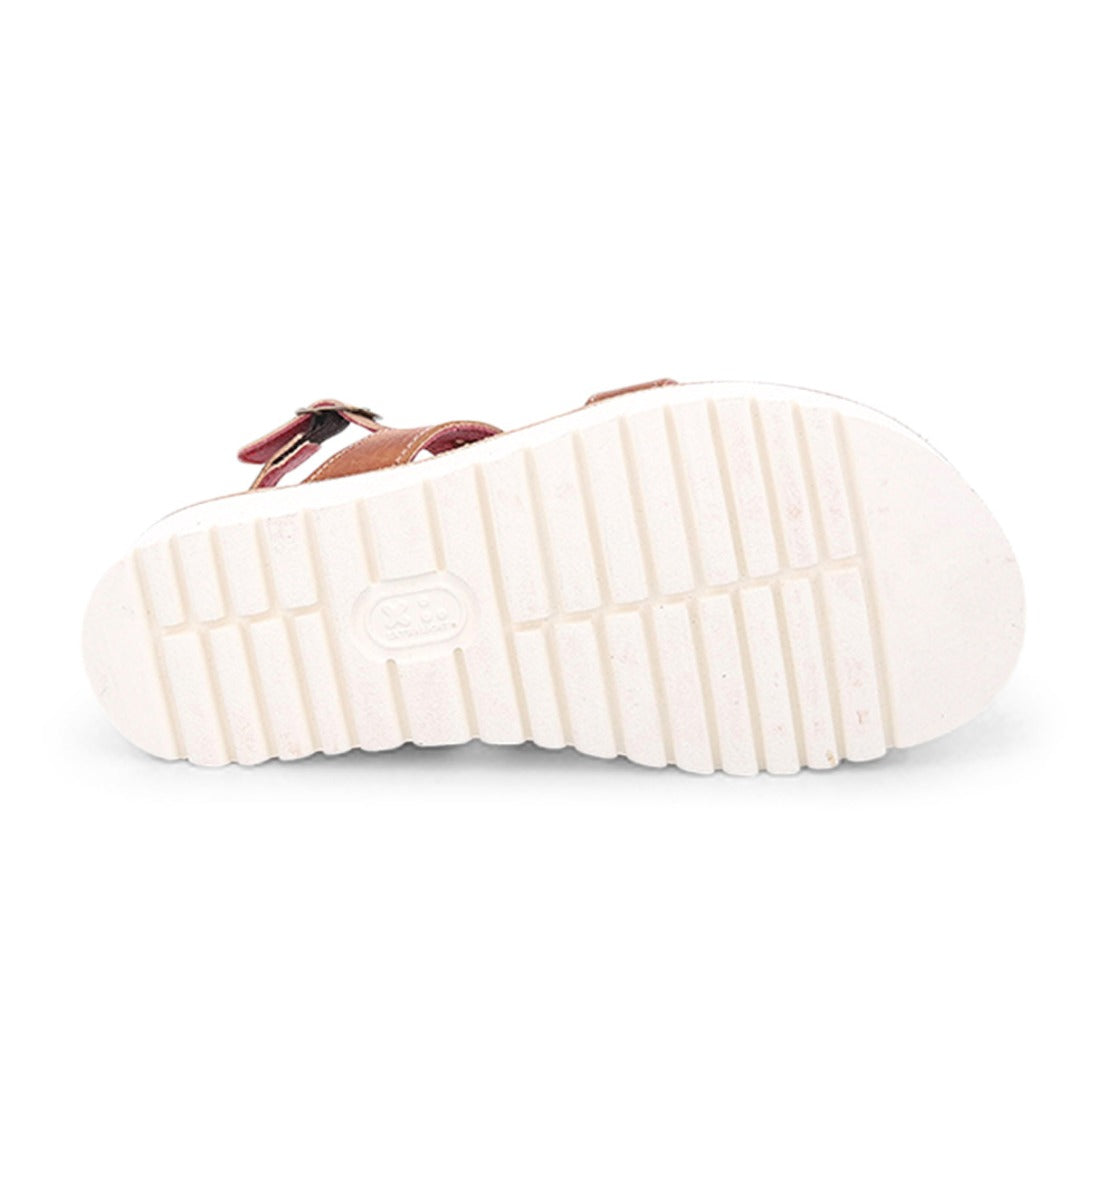 A pair of Bed Stu sandals with white straps and a white sole.